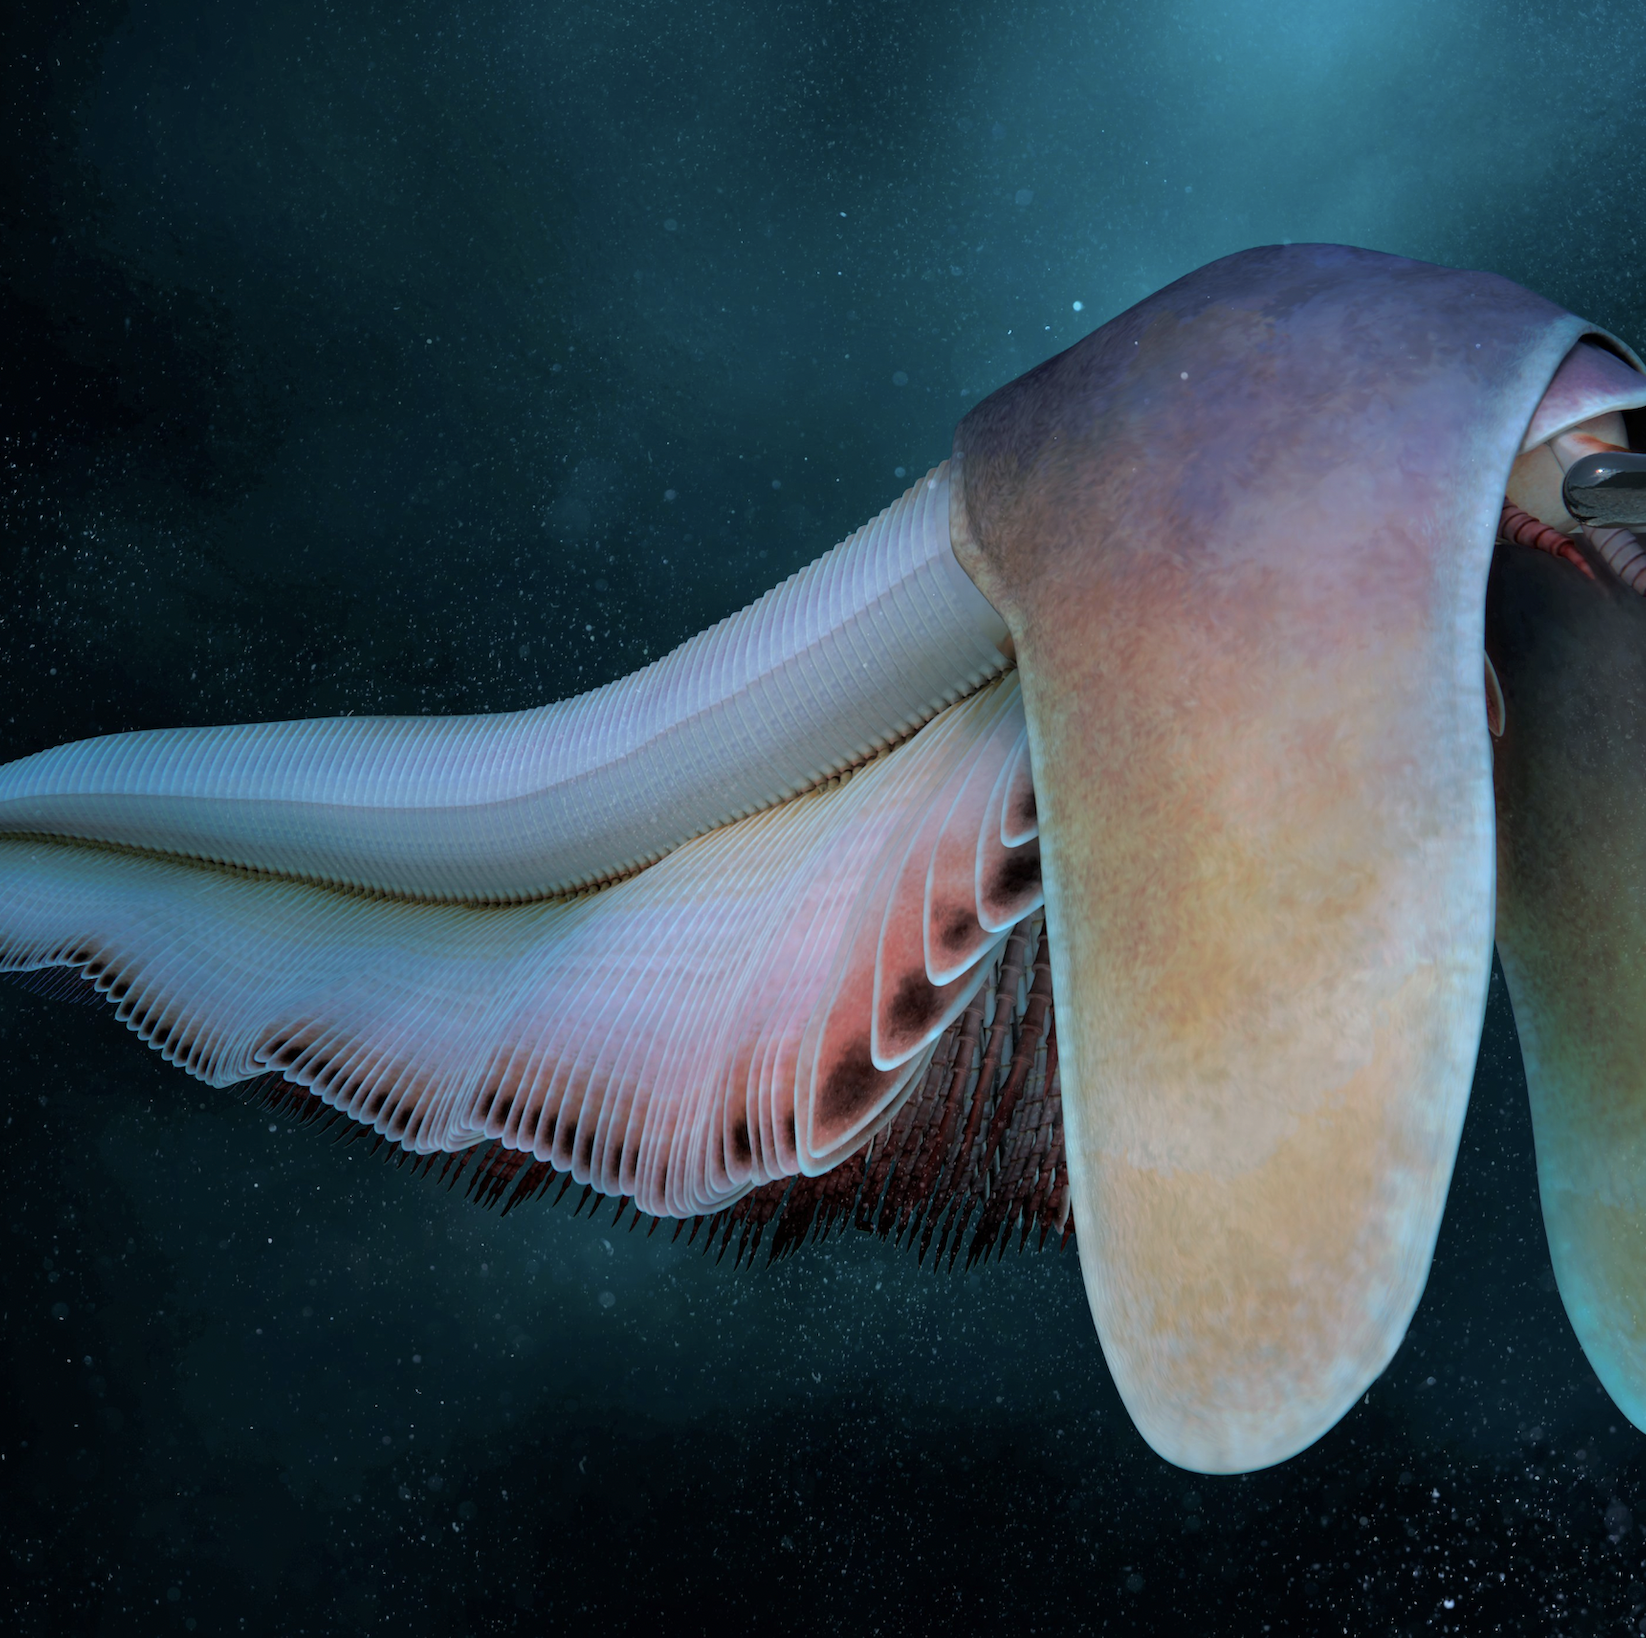 This Gigantic New Burgess Shale Creature Looks Like a Floppy-Eared Hound